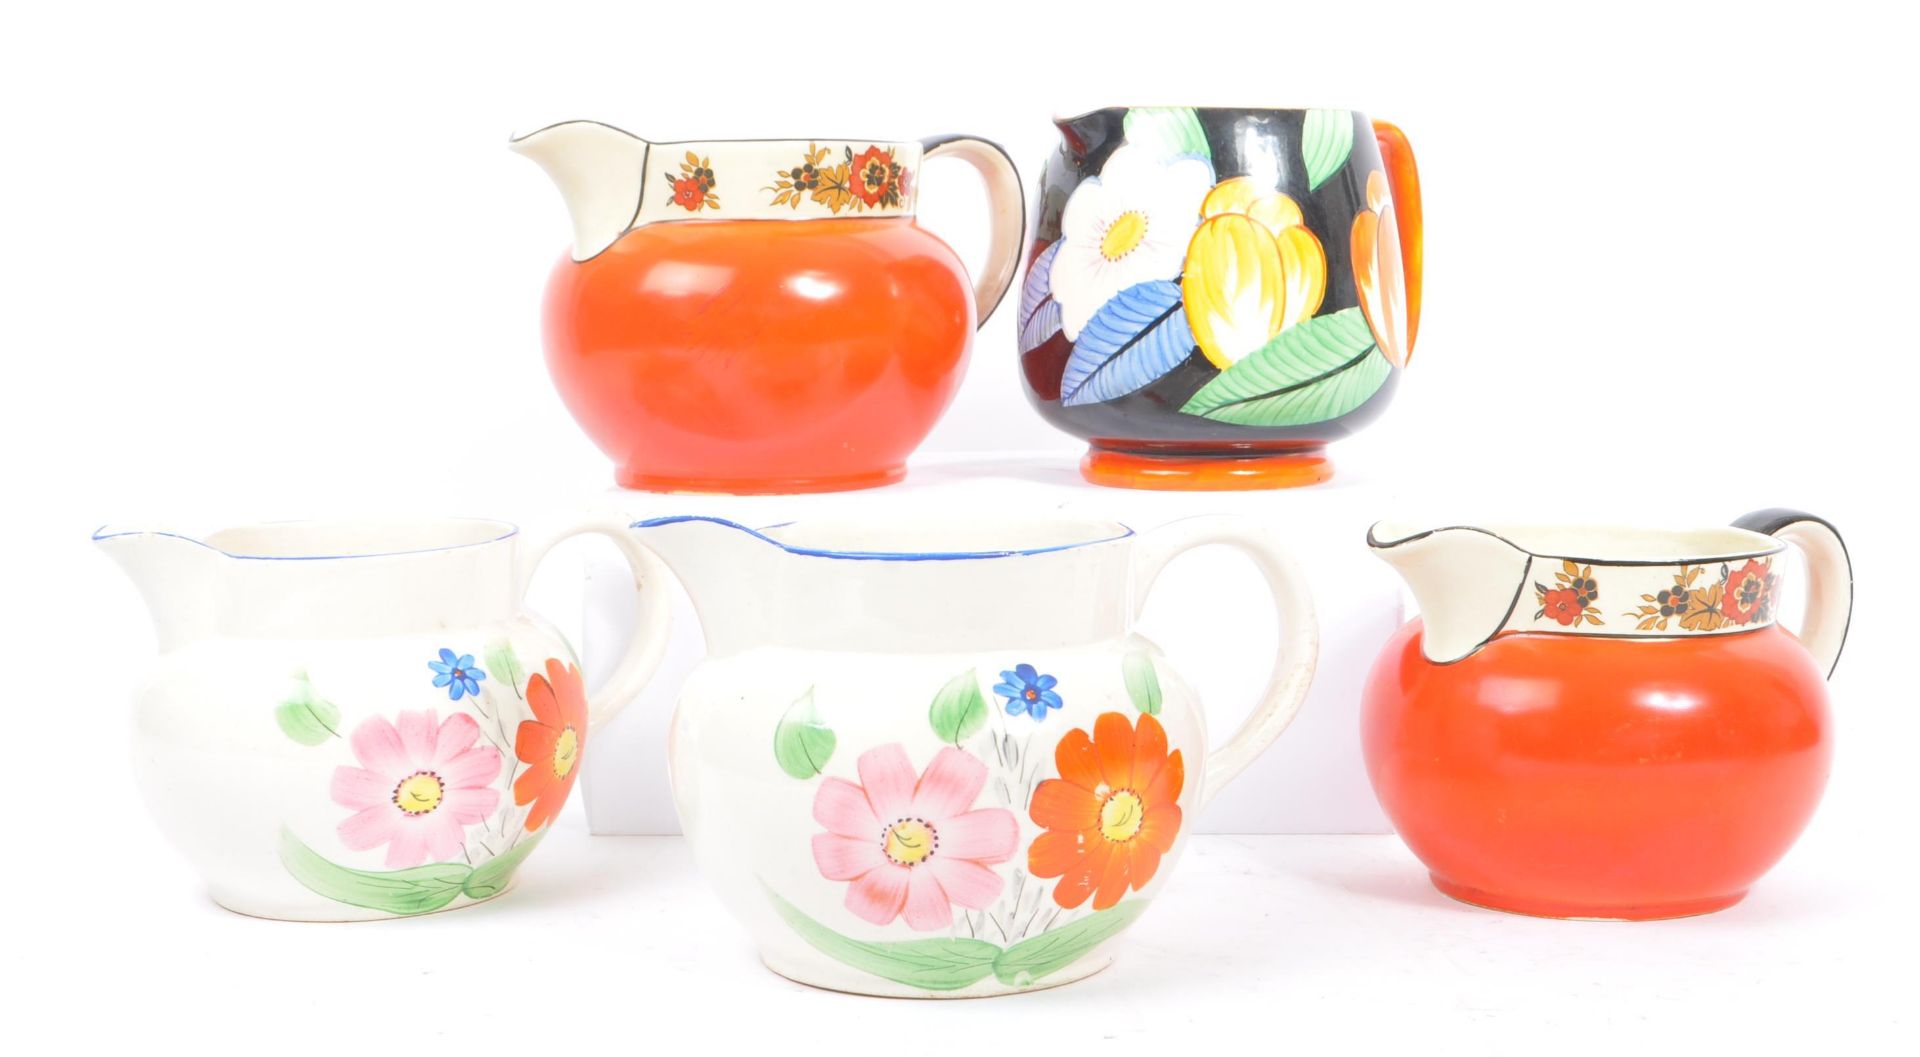 COLLECTION OF FIVE VINTAGE 20TH CENTURY CERAMIC JUGS